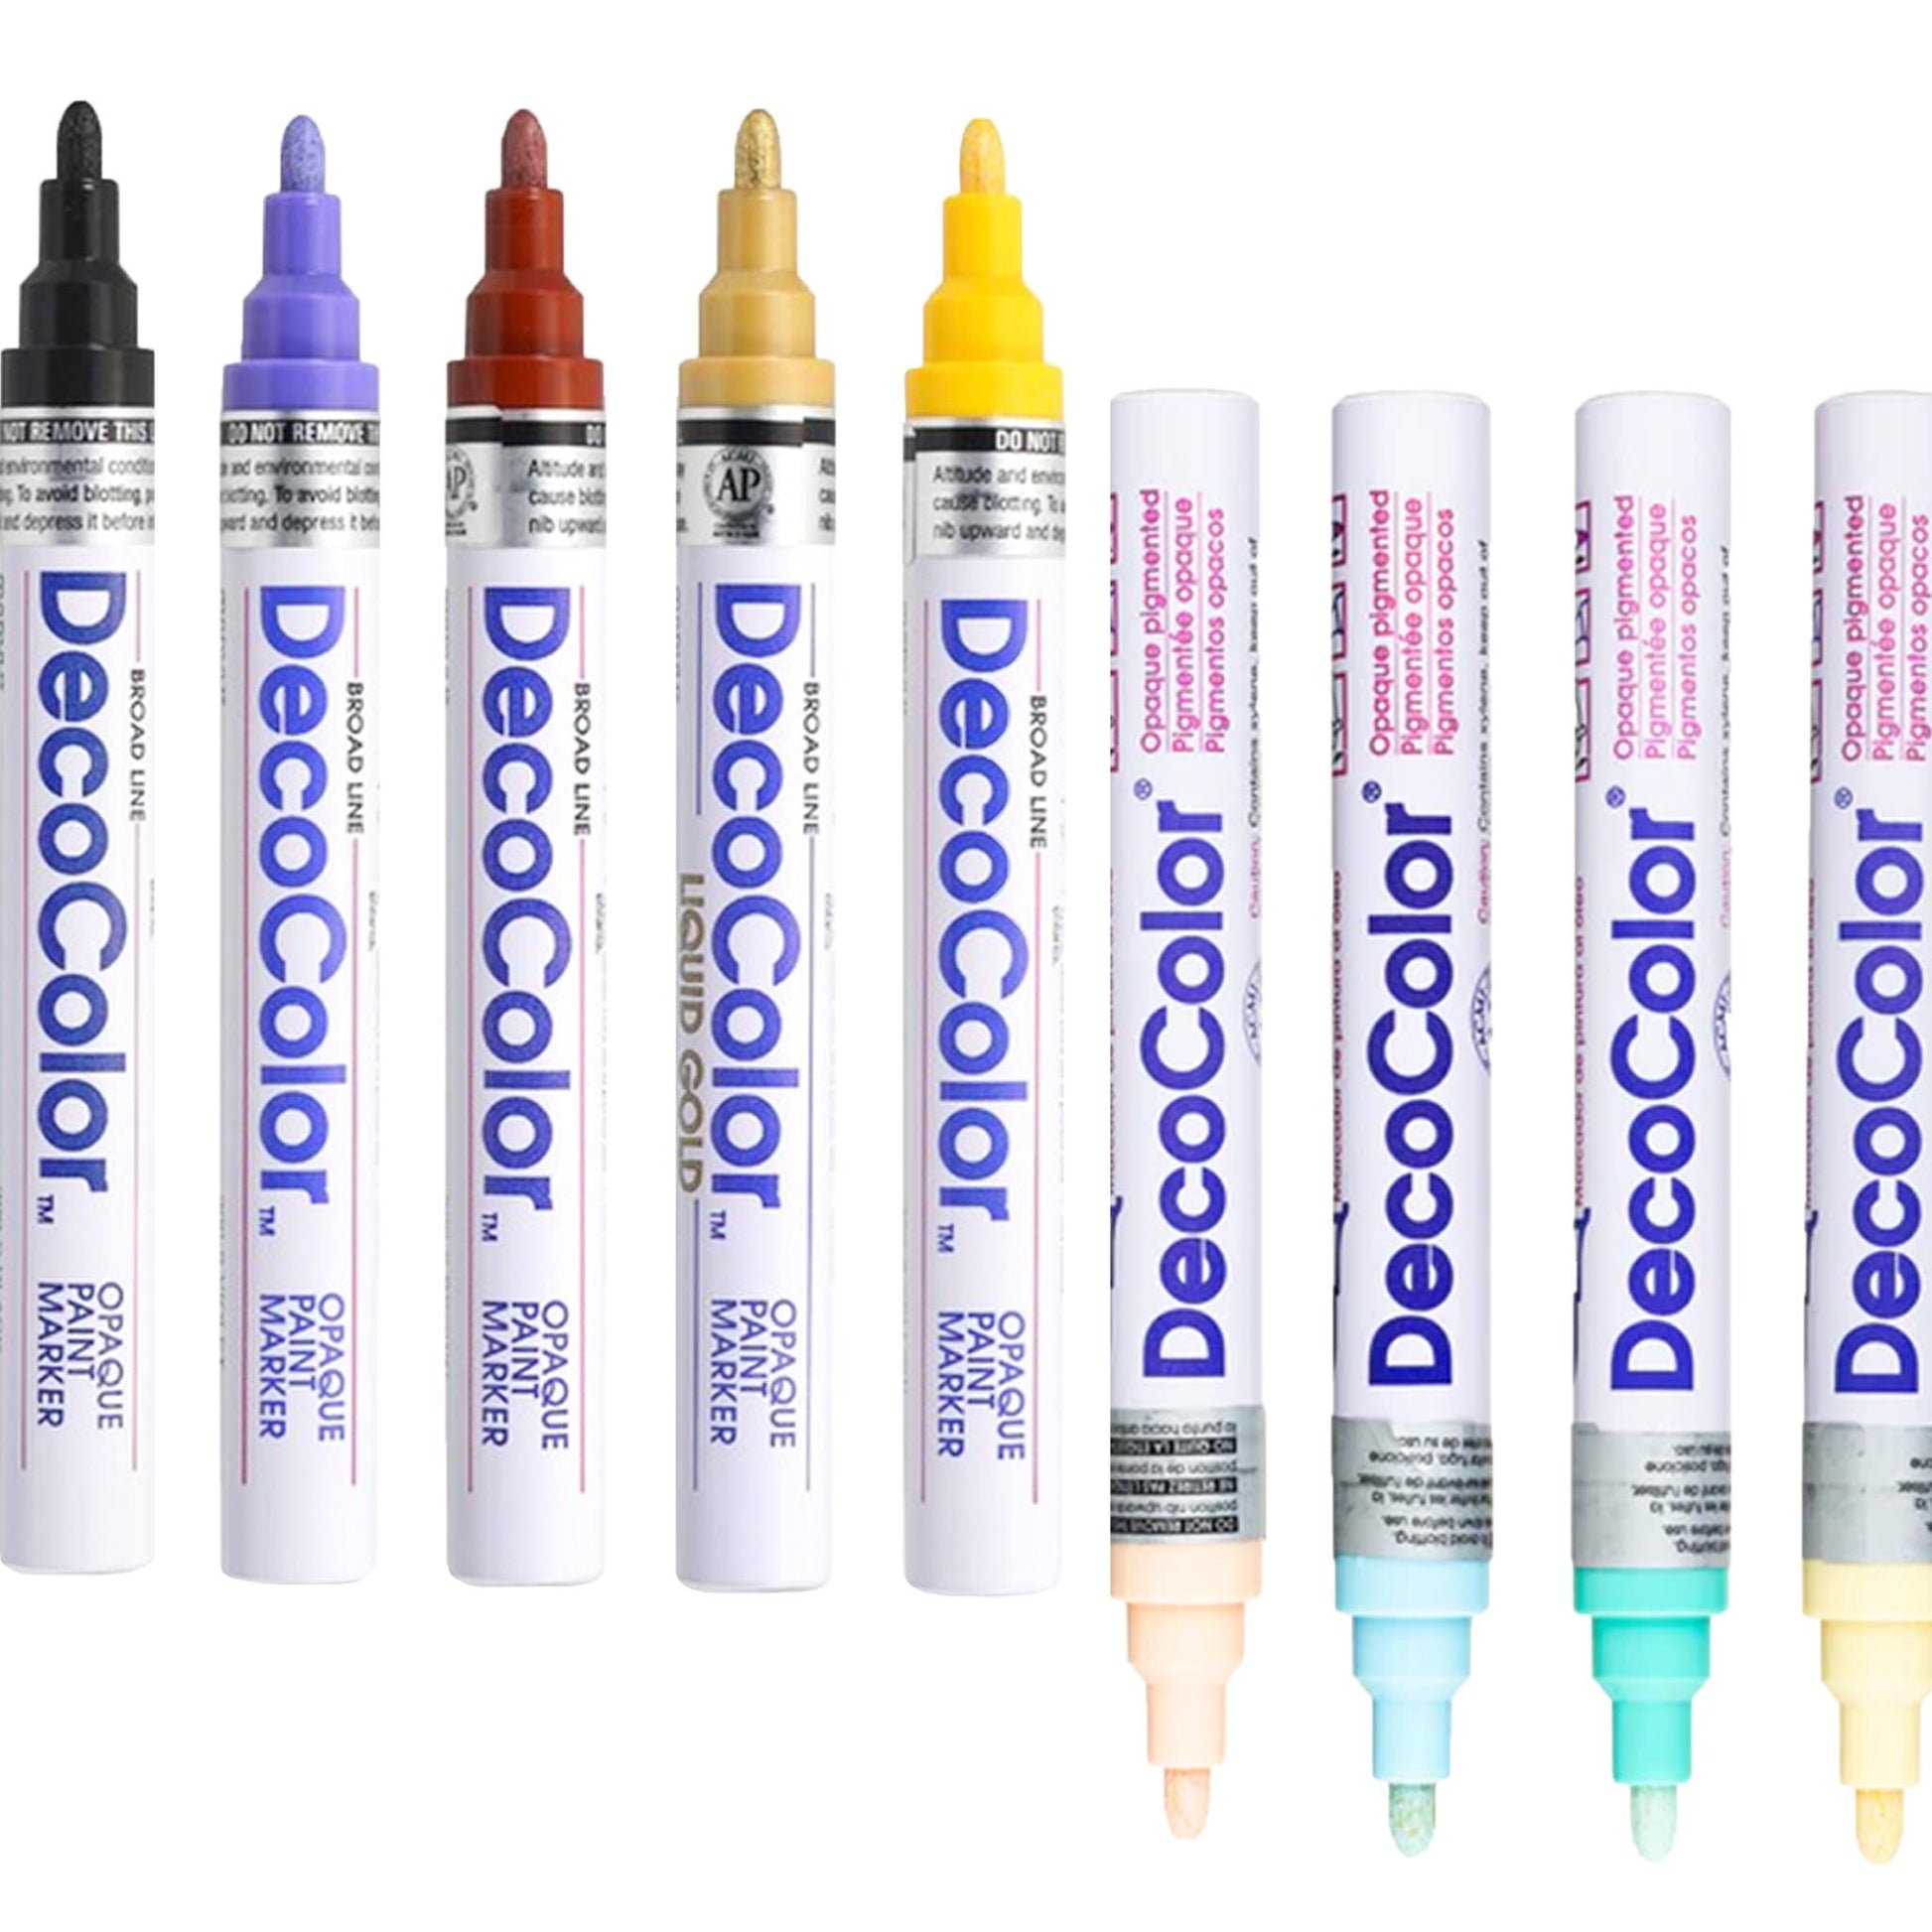 Deco Color artist paint markers in various colors.